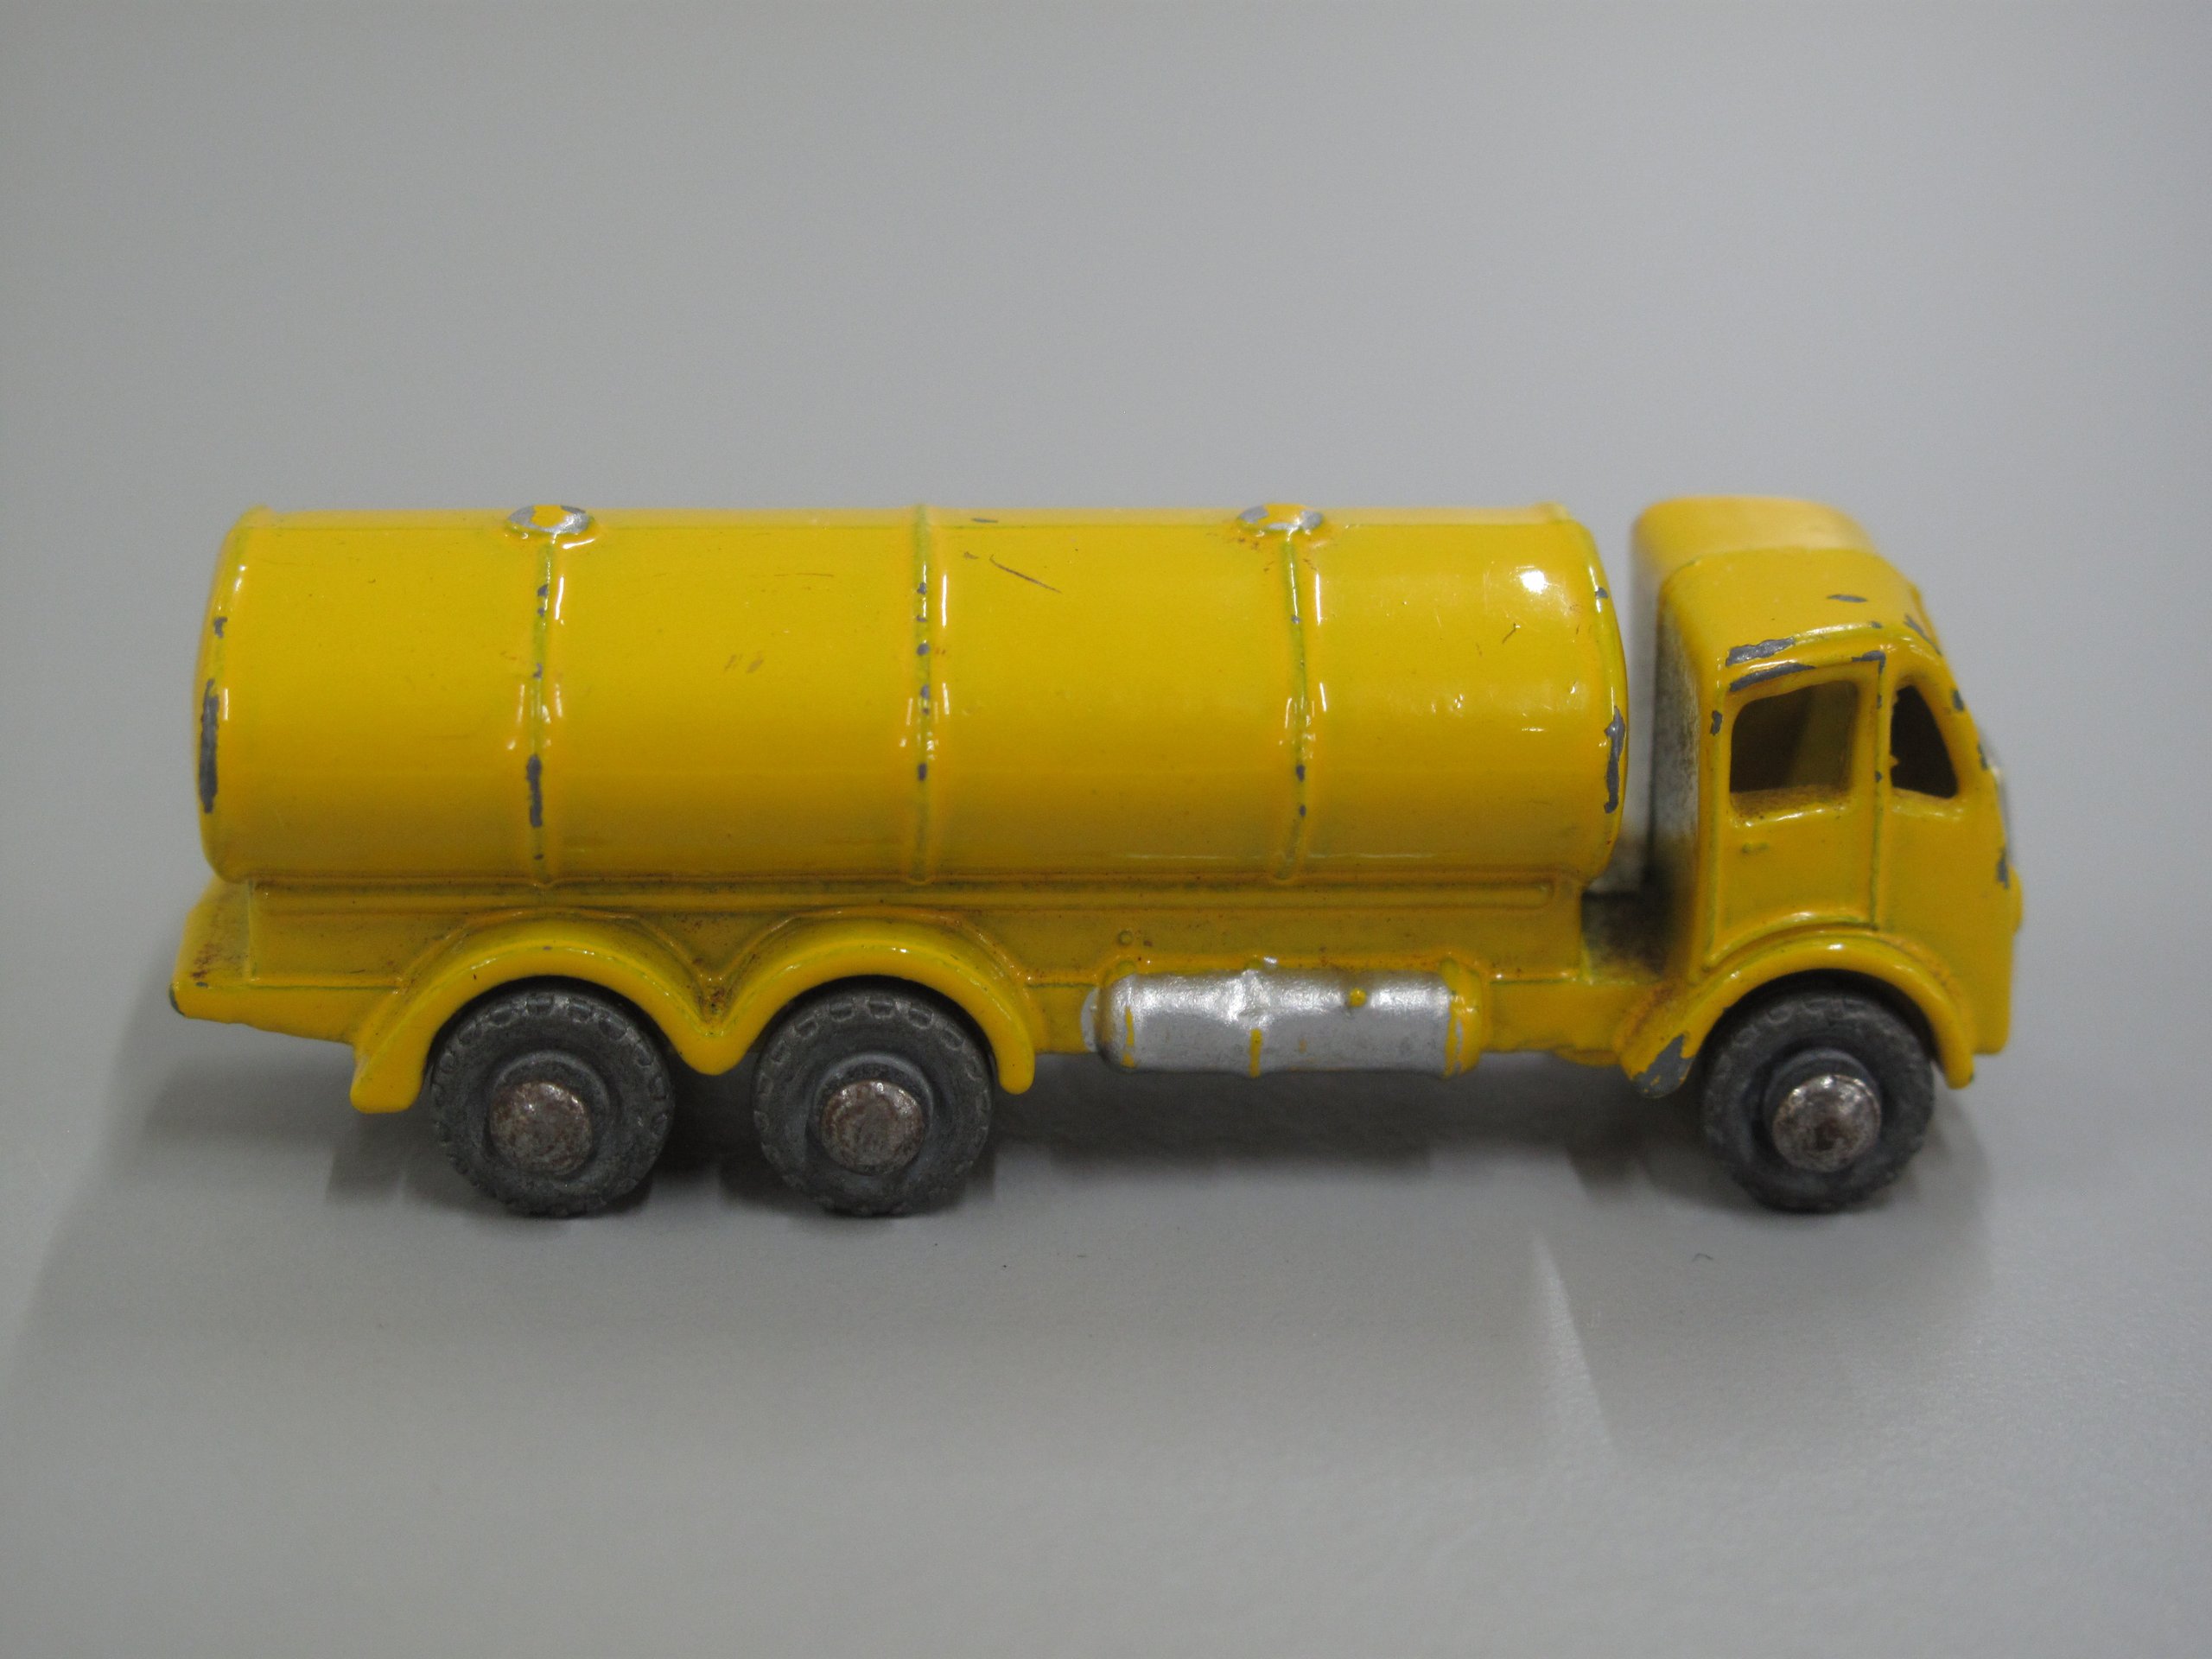 Powerhouse Collection - Toy matchbox ERF petrol tanker truck made 